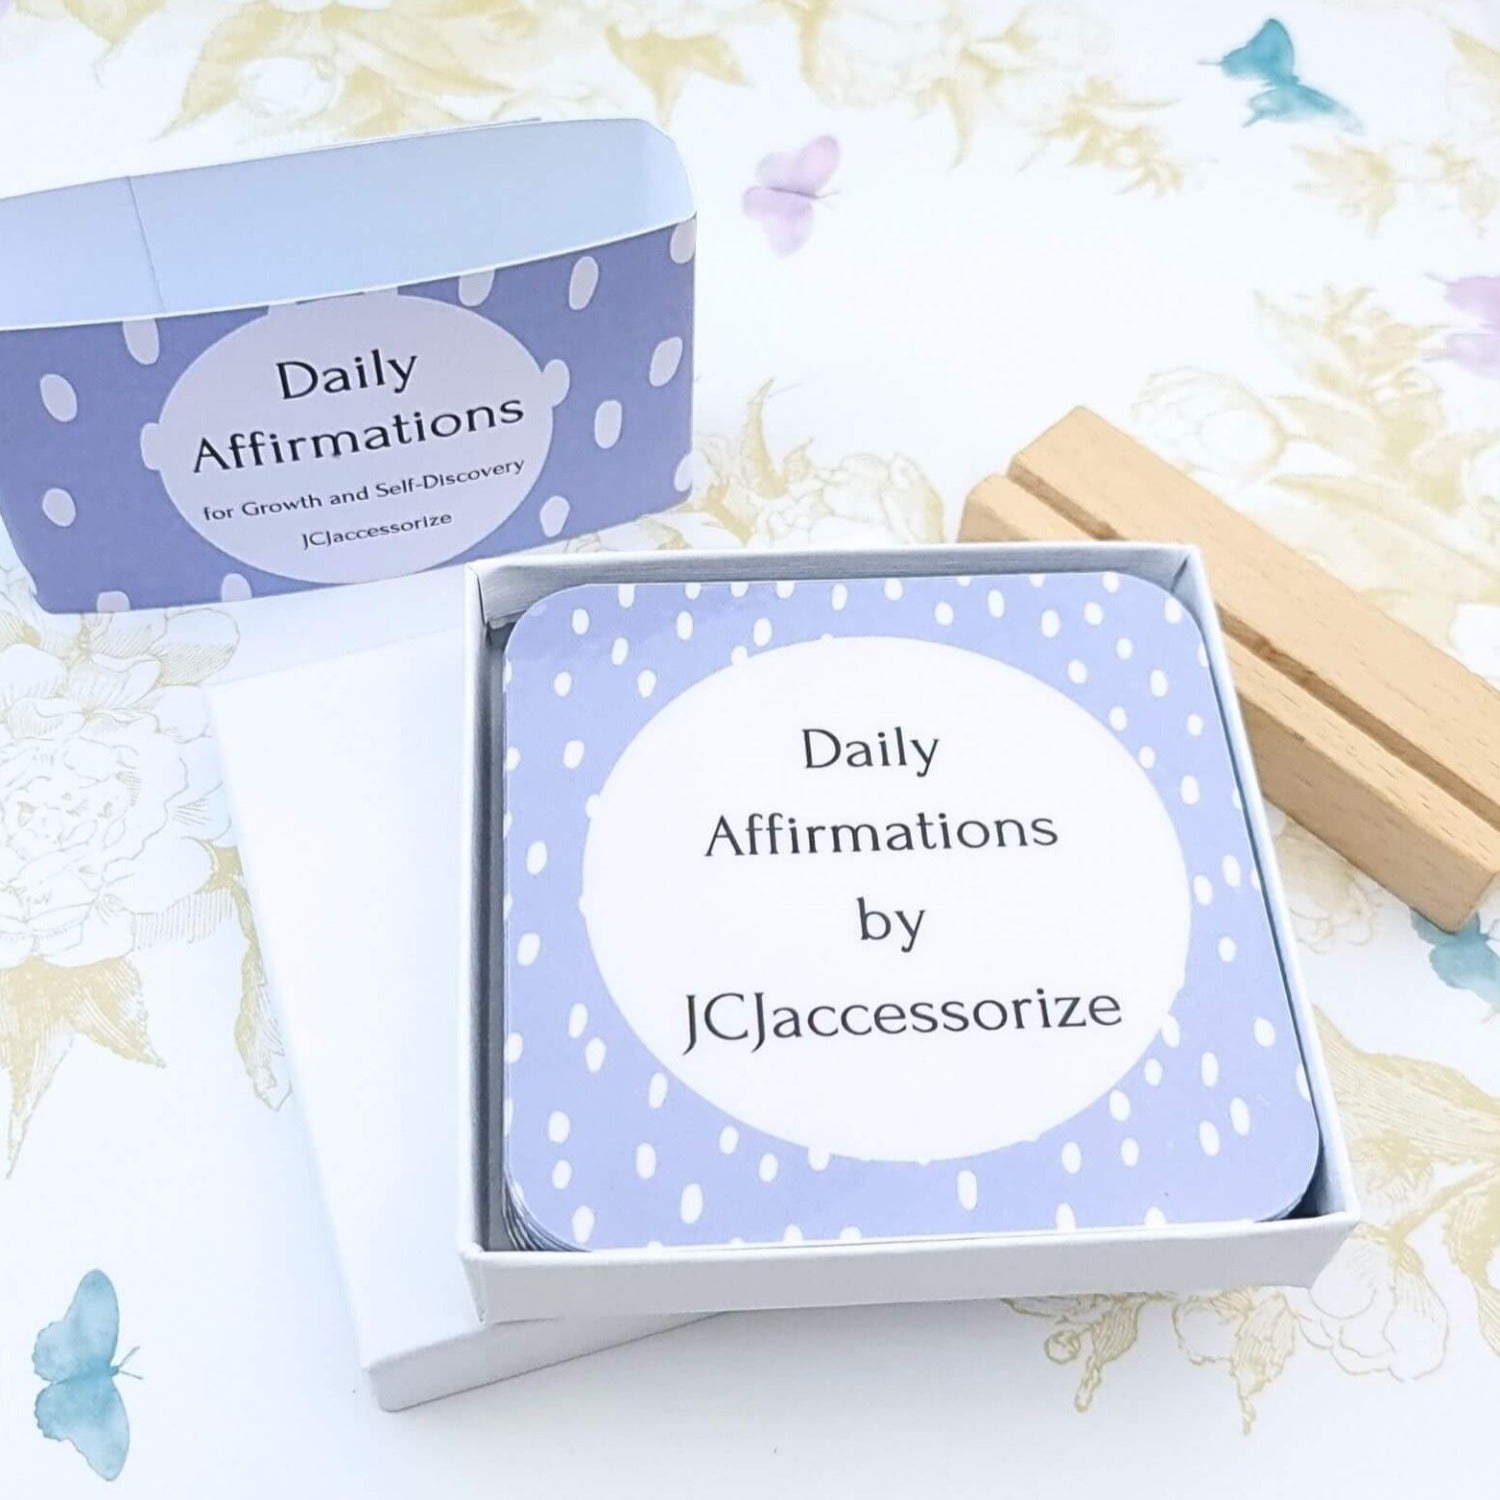 daily affirmation cards in gift box